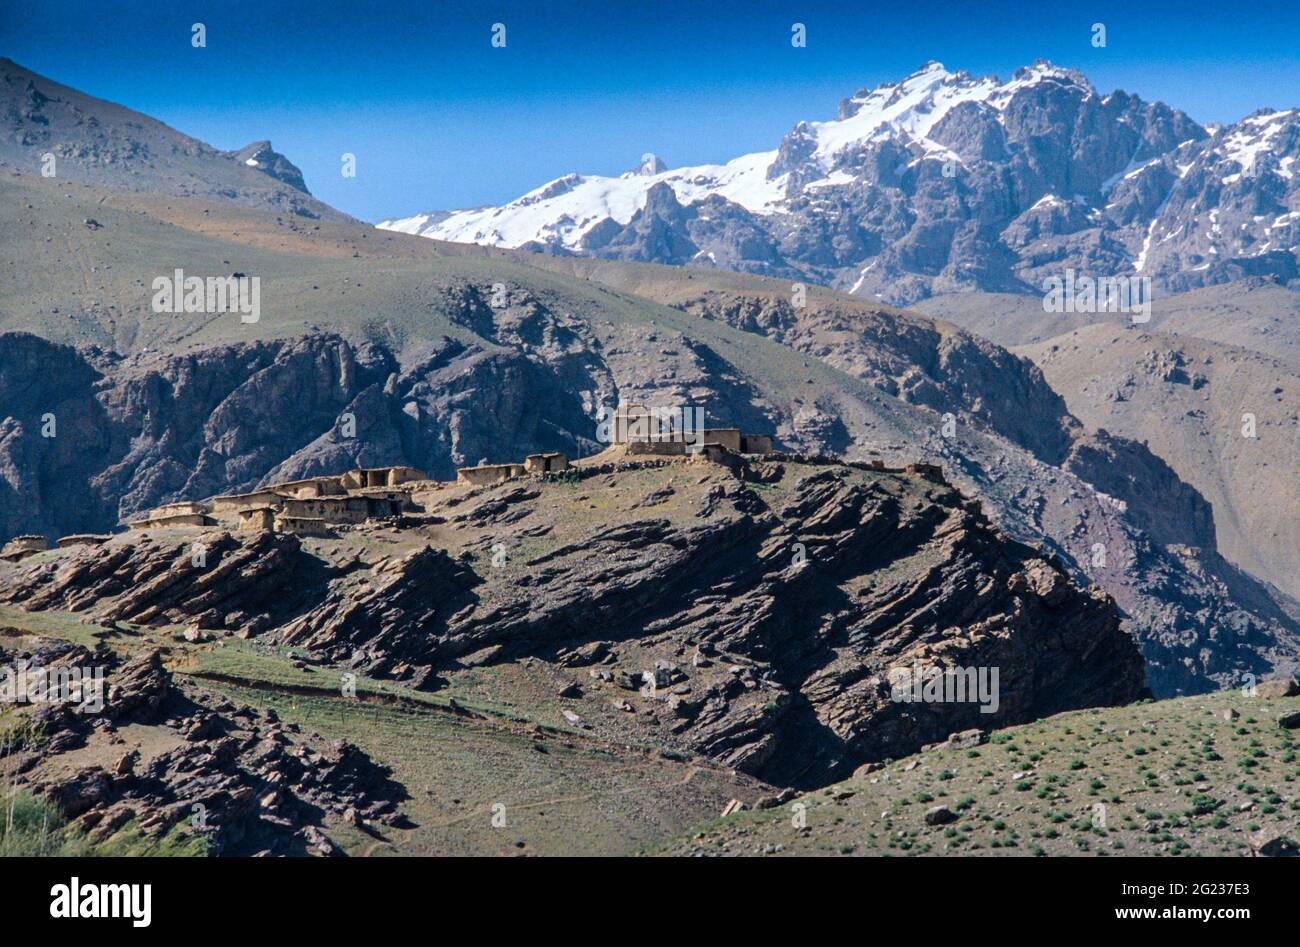 Wide view of Drass, Gateway to Ladakh, backed by snow-capped mountains of the Himalayas. Kargil District, North India Stock Photo